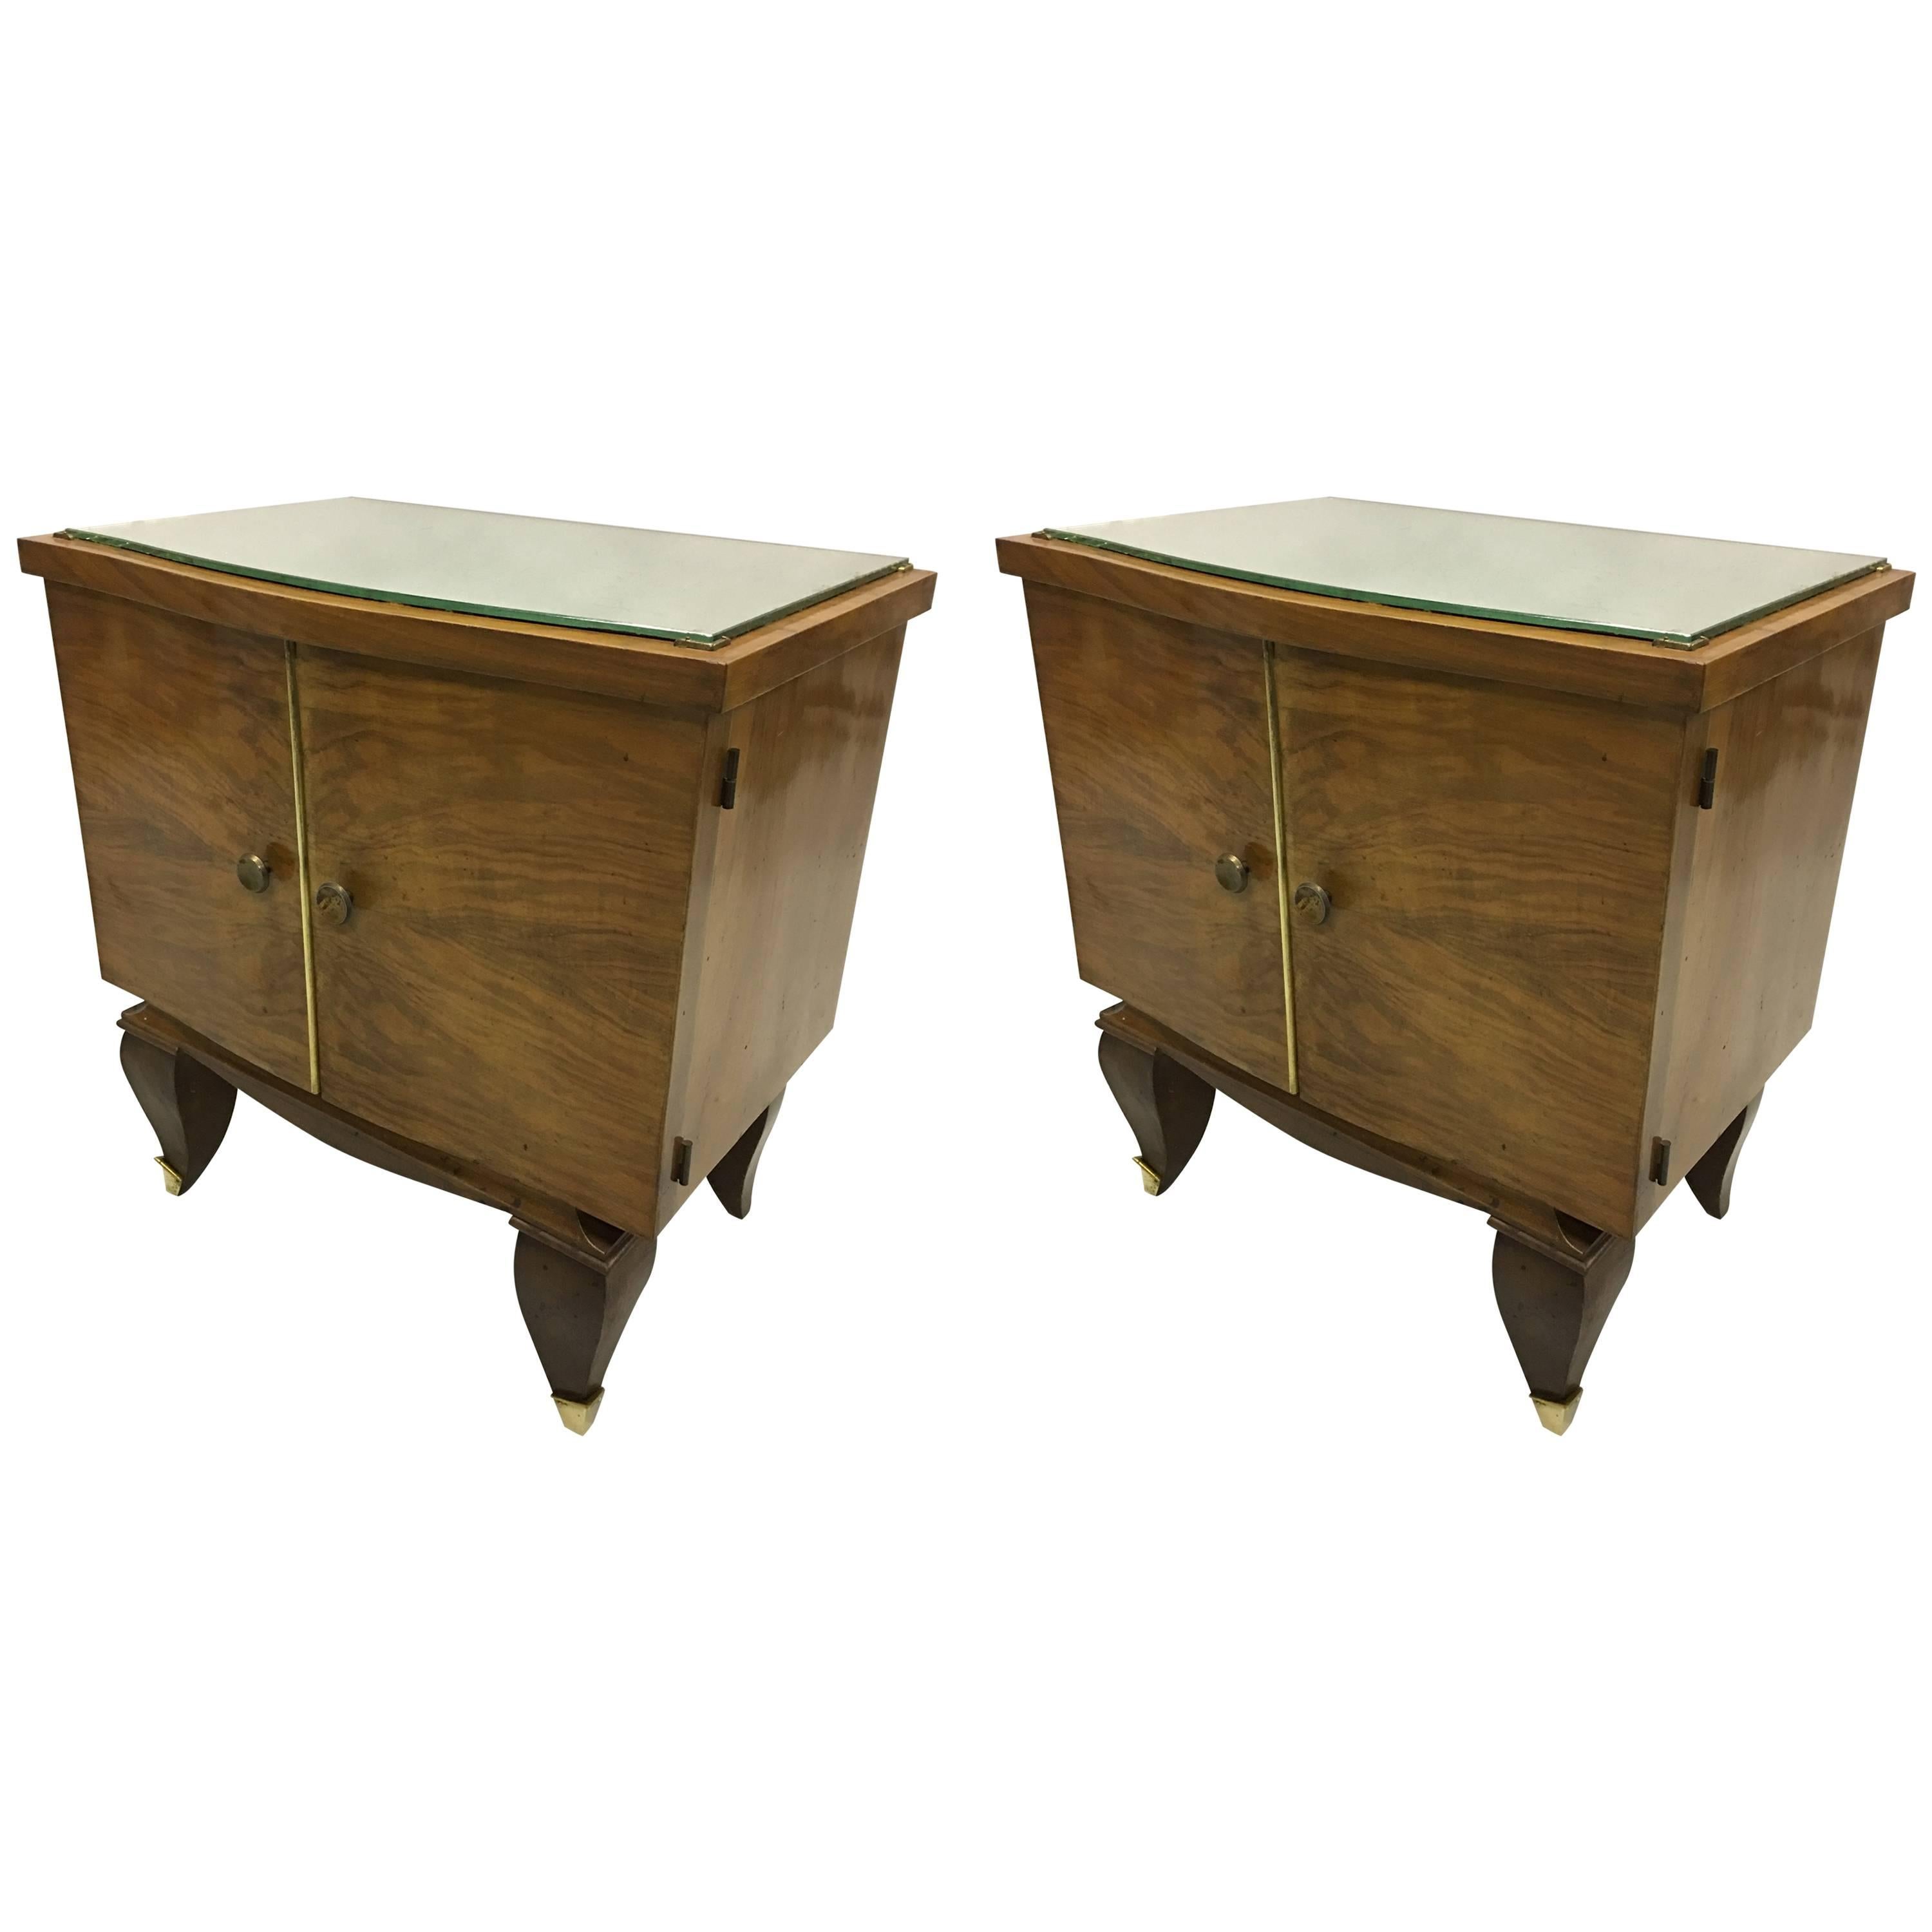 Pair of Mid-Century Modern Neoclassical Side Tables/Nightstands, Rene Prou